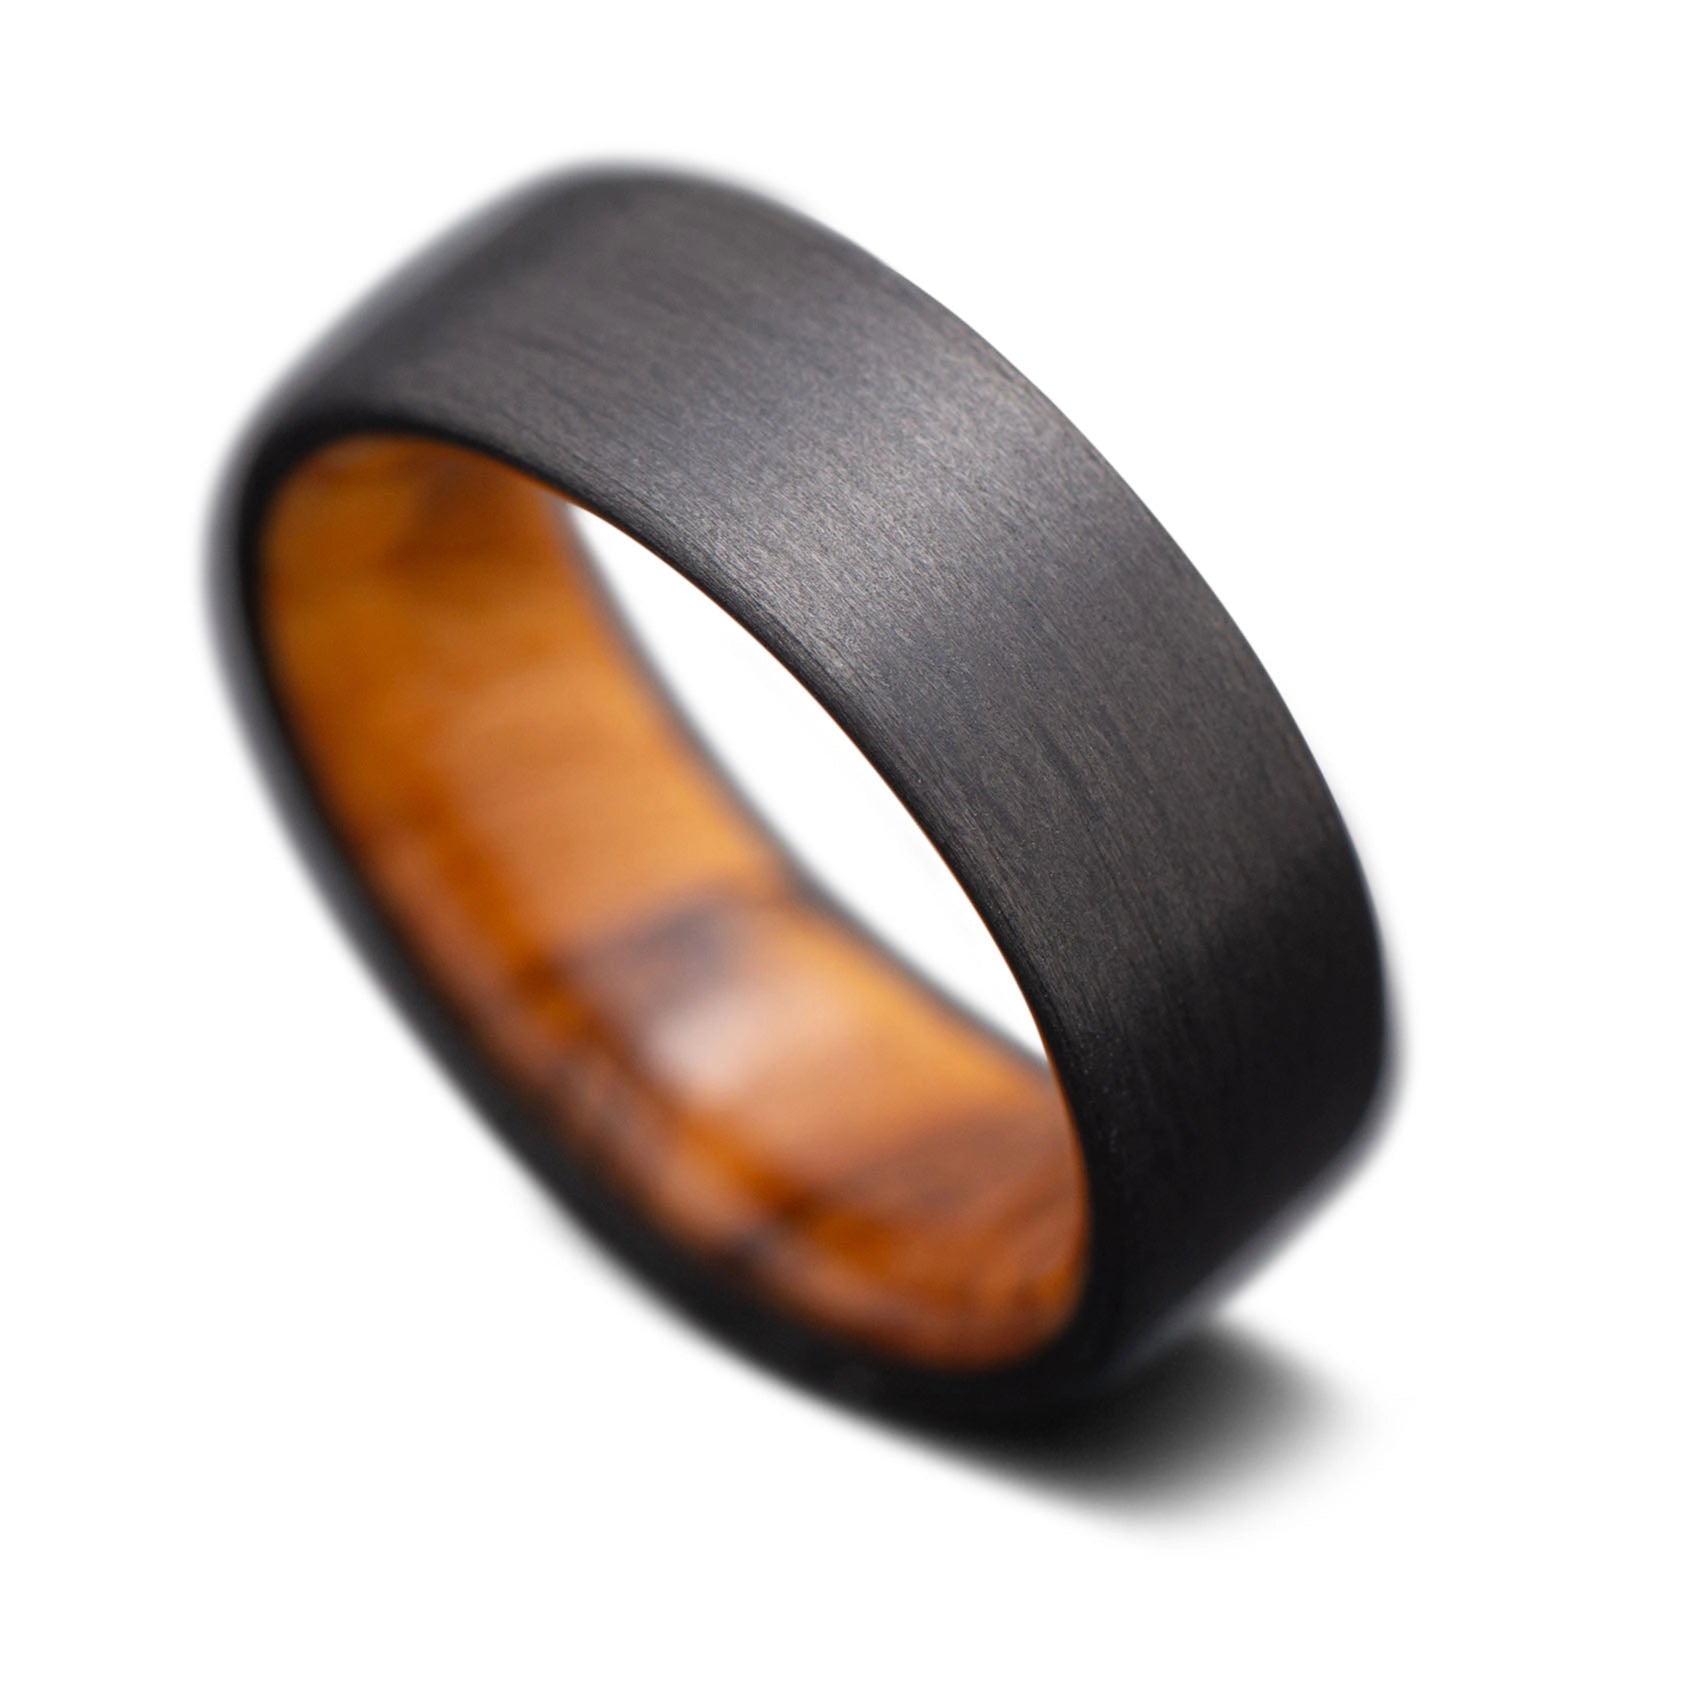 Carbon Fiber ring with Olivewood Inner sleeve, wedding ring, 7mm -THE QUANTUM